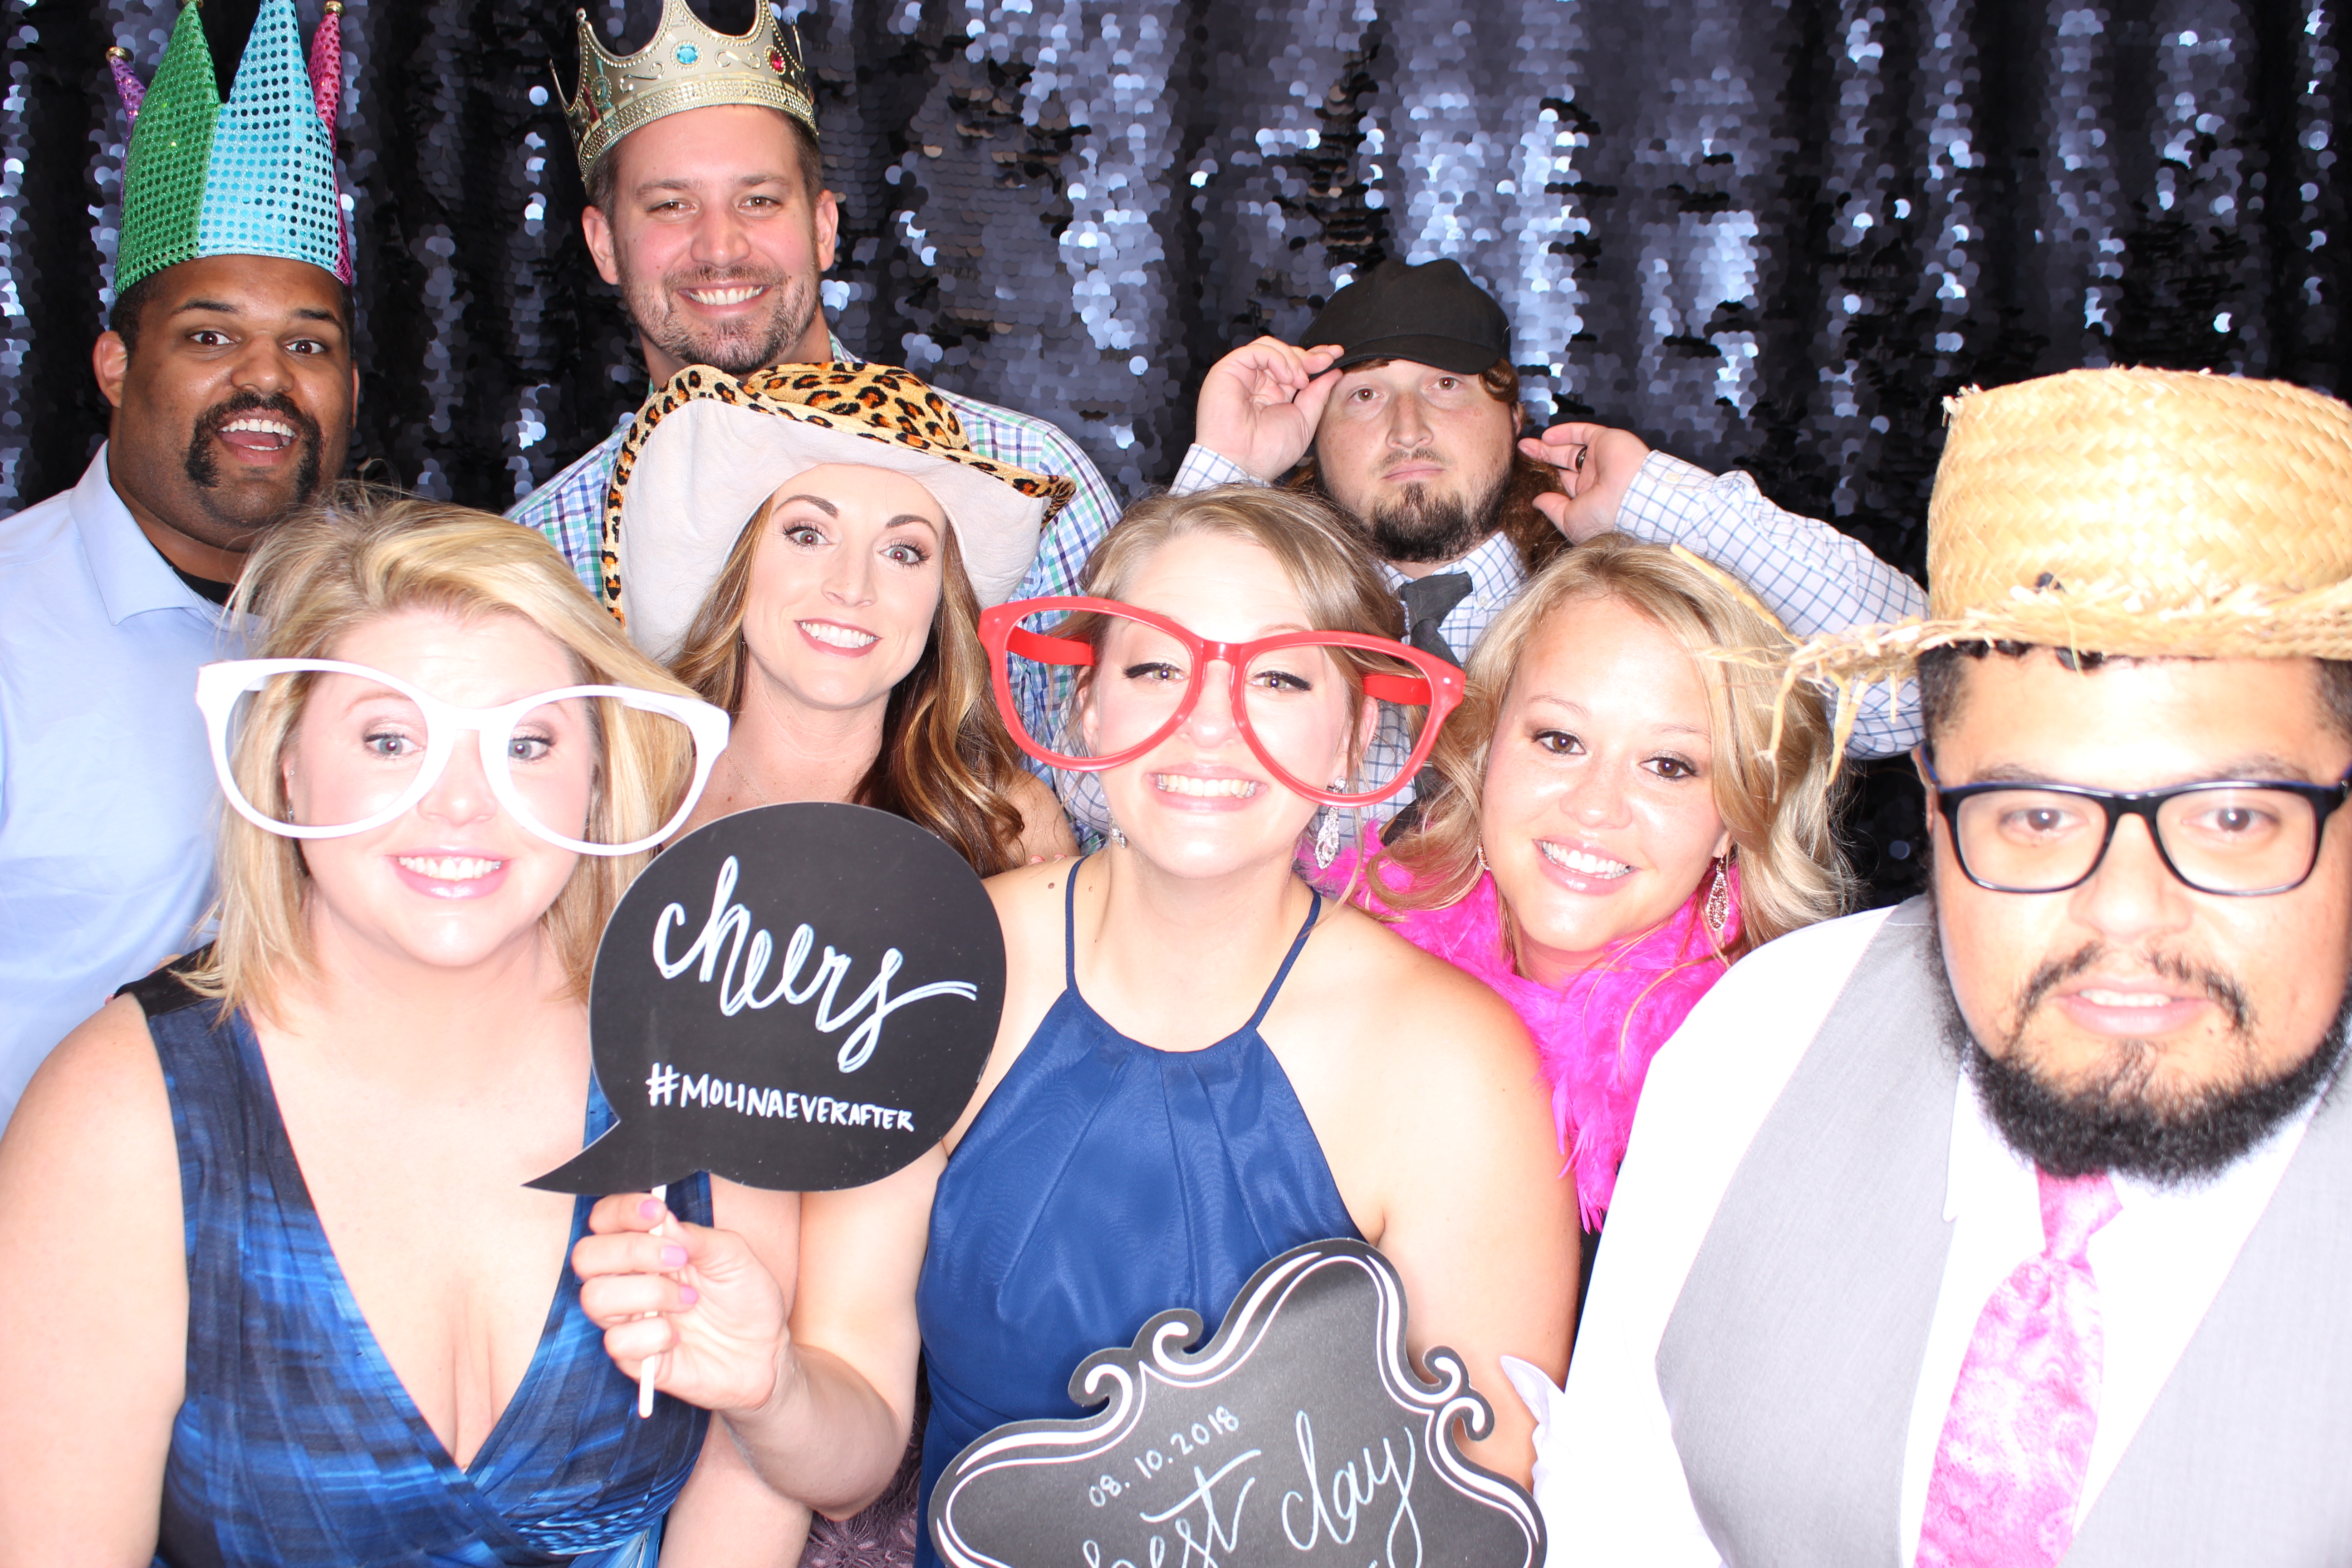 Three Points Event Space, Banana Who Booth, Kansas City Photo booth, KC photo booth, Kansas City, Skyline, Best photo booth, Black Sequin backdrops, Backdrops for sale, KC weddings, Animated GIFS